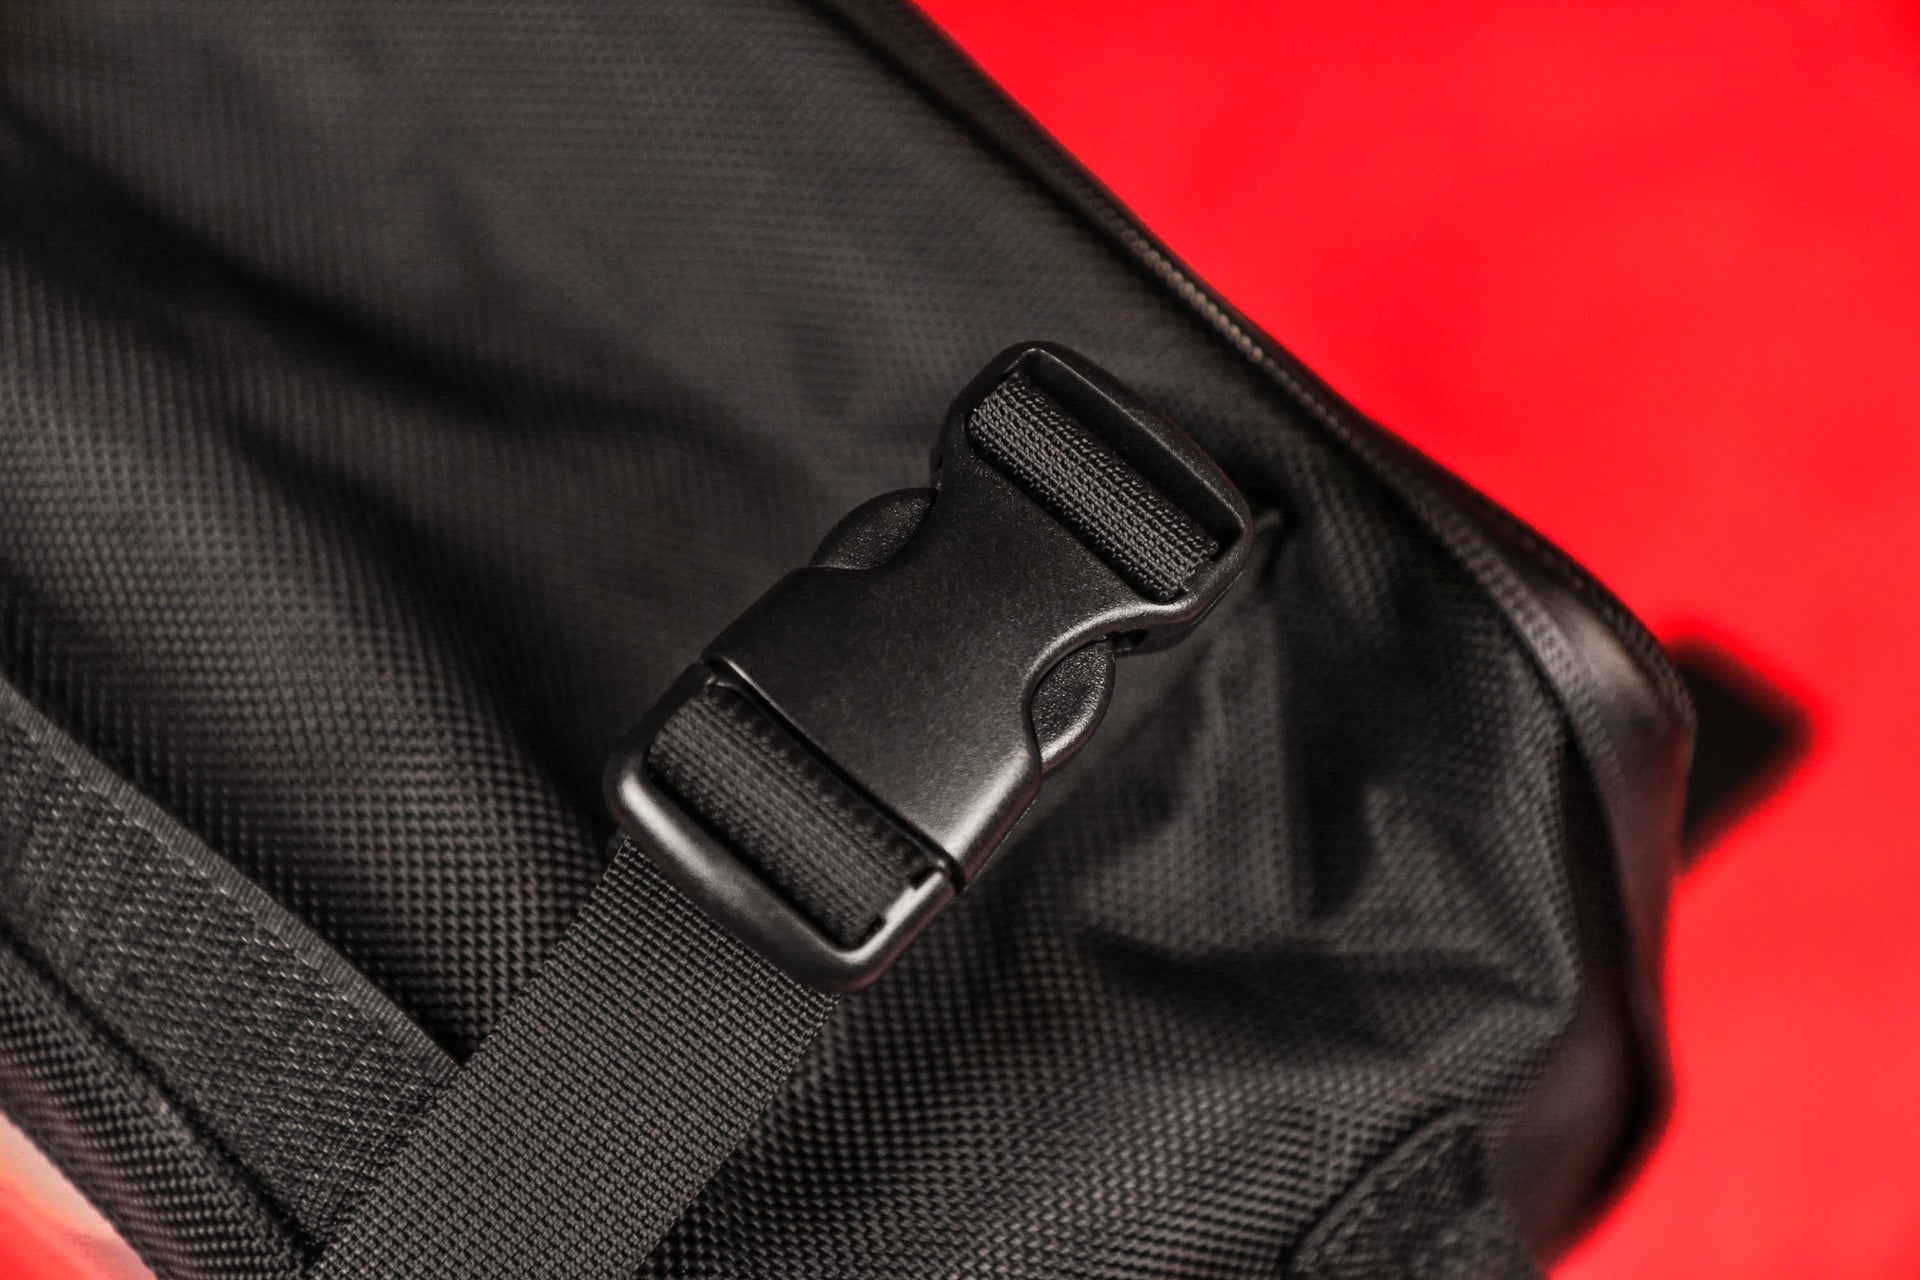 The Strap on the Black Box Portable Hanging Sneaker Bag For Travel and Storage With Clear Window